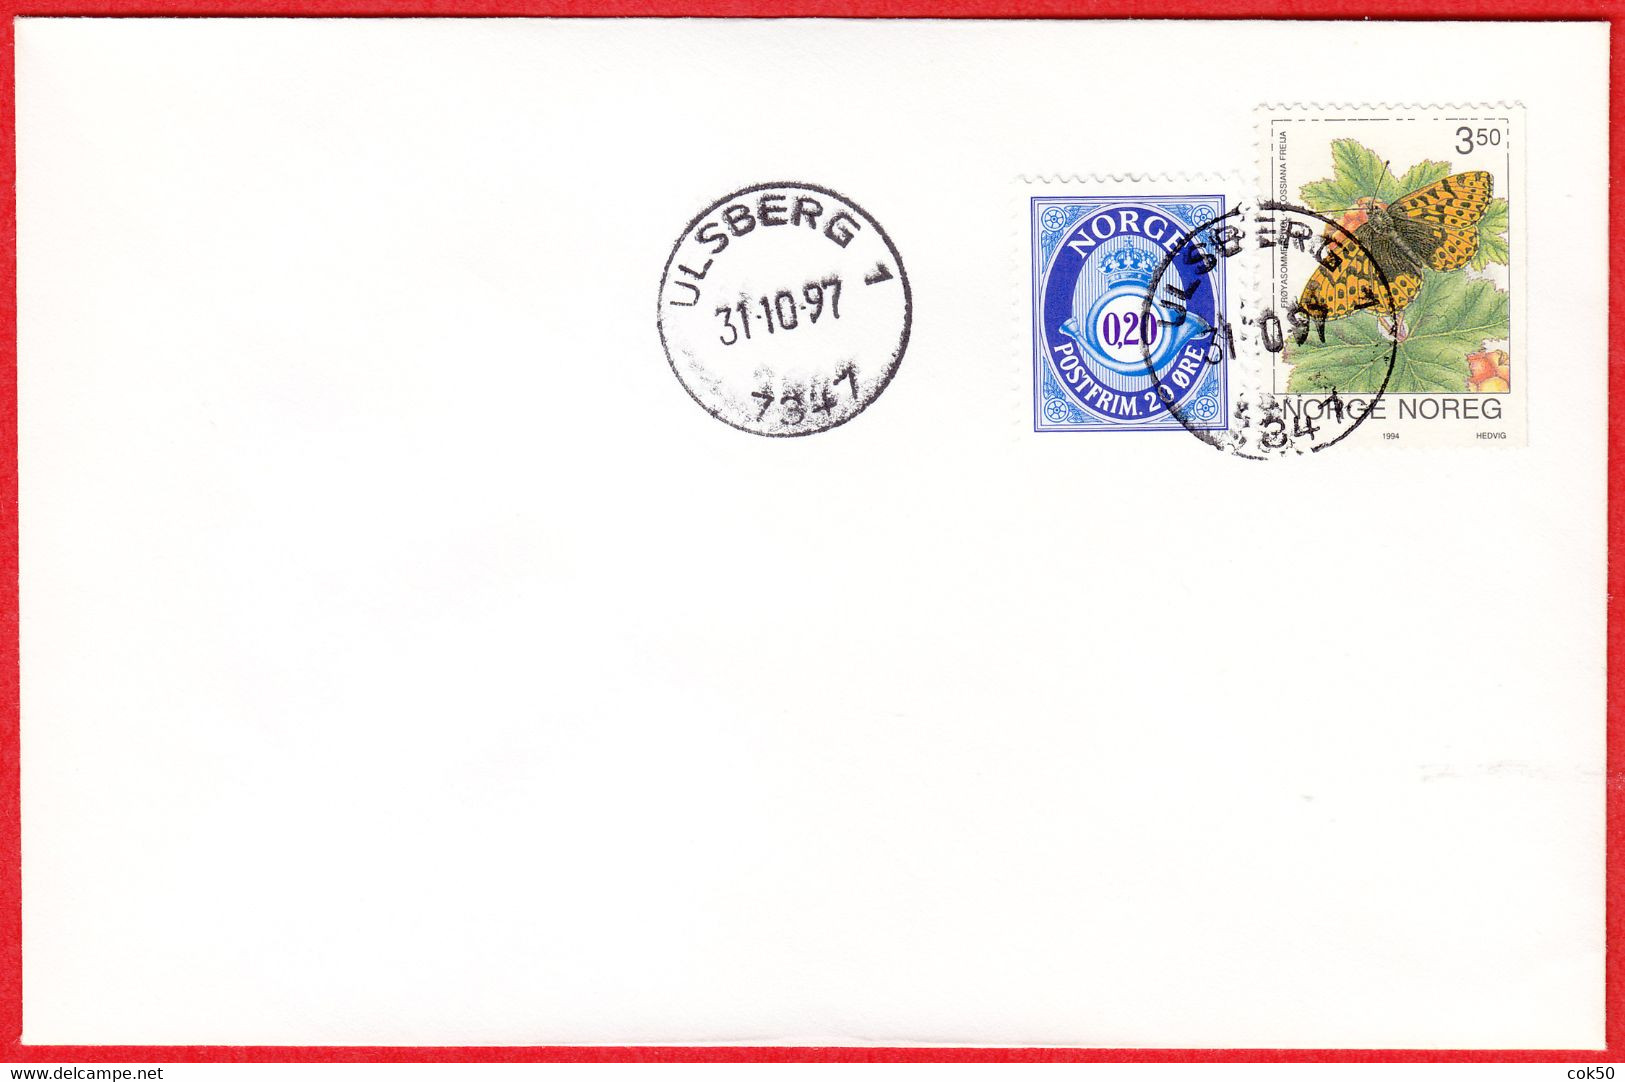 NORWAY -  7347 ULSBERG 1 (Trøndelag County) - Last Day/postoffice Closed On 1997.10.31 - Local Post Stamps